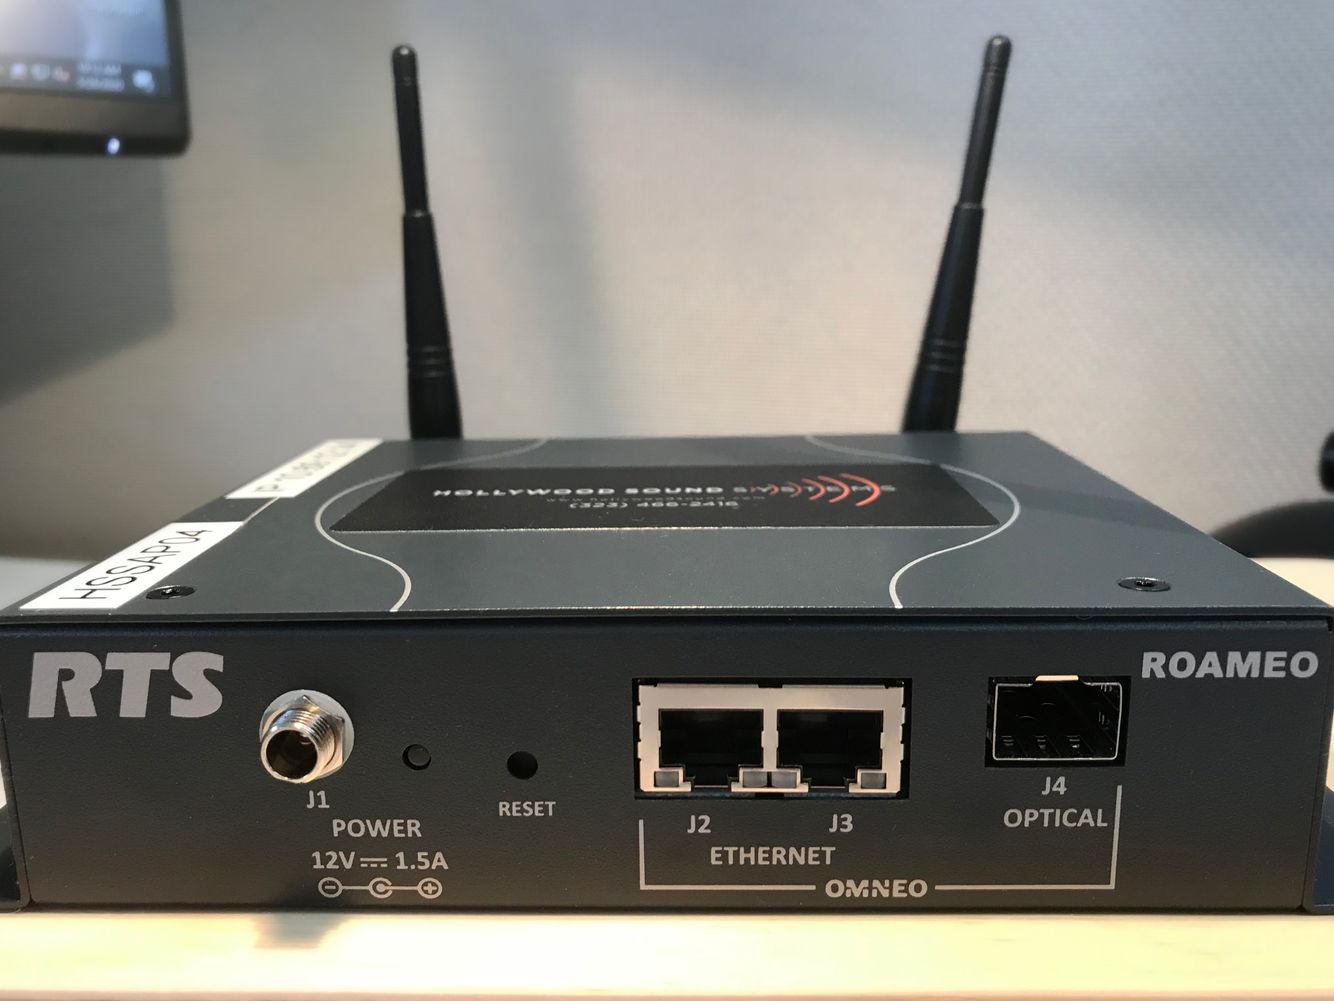 The RTS AP-1800 ROAMEO System Access Point is available at Hollywood Sound Sytems.